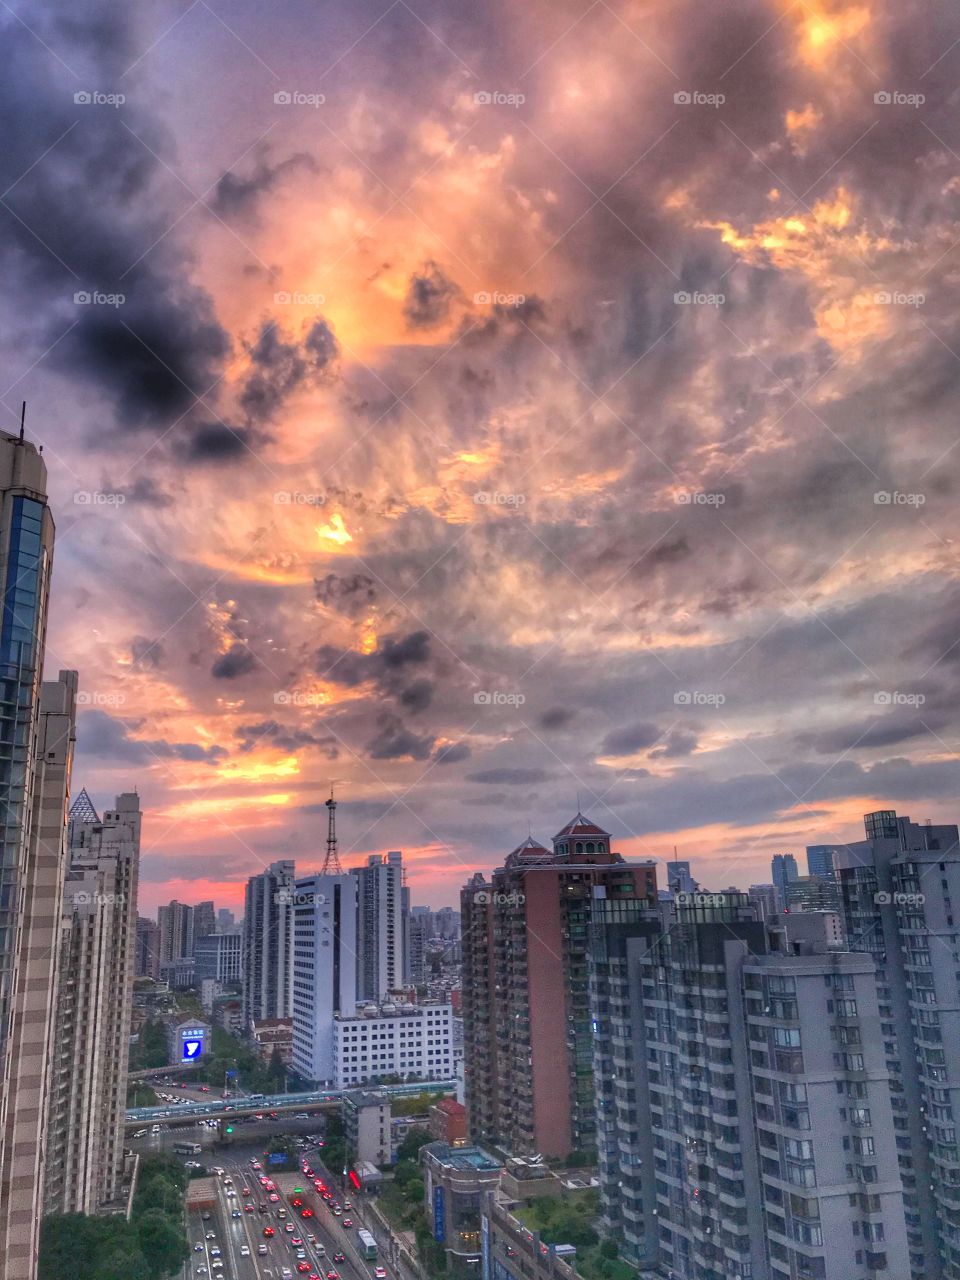 Sunset over Shanghai - near by Madang Lu metro stop, south of Xintiandi.... fire in the sky - amazing clouds 